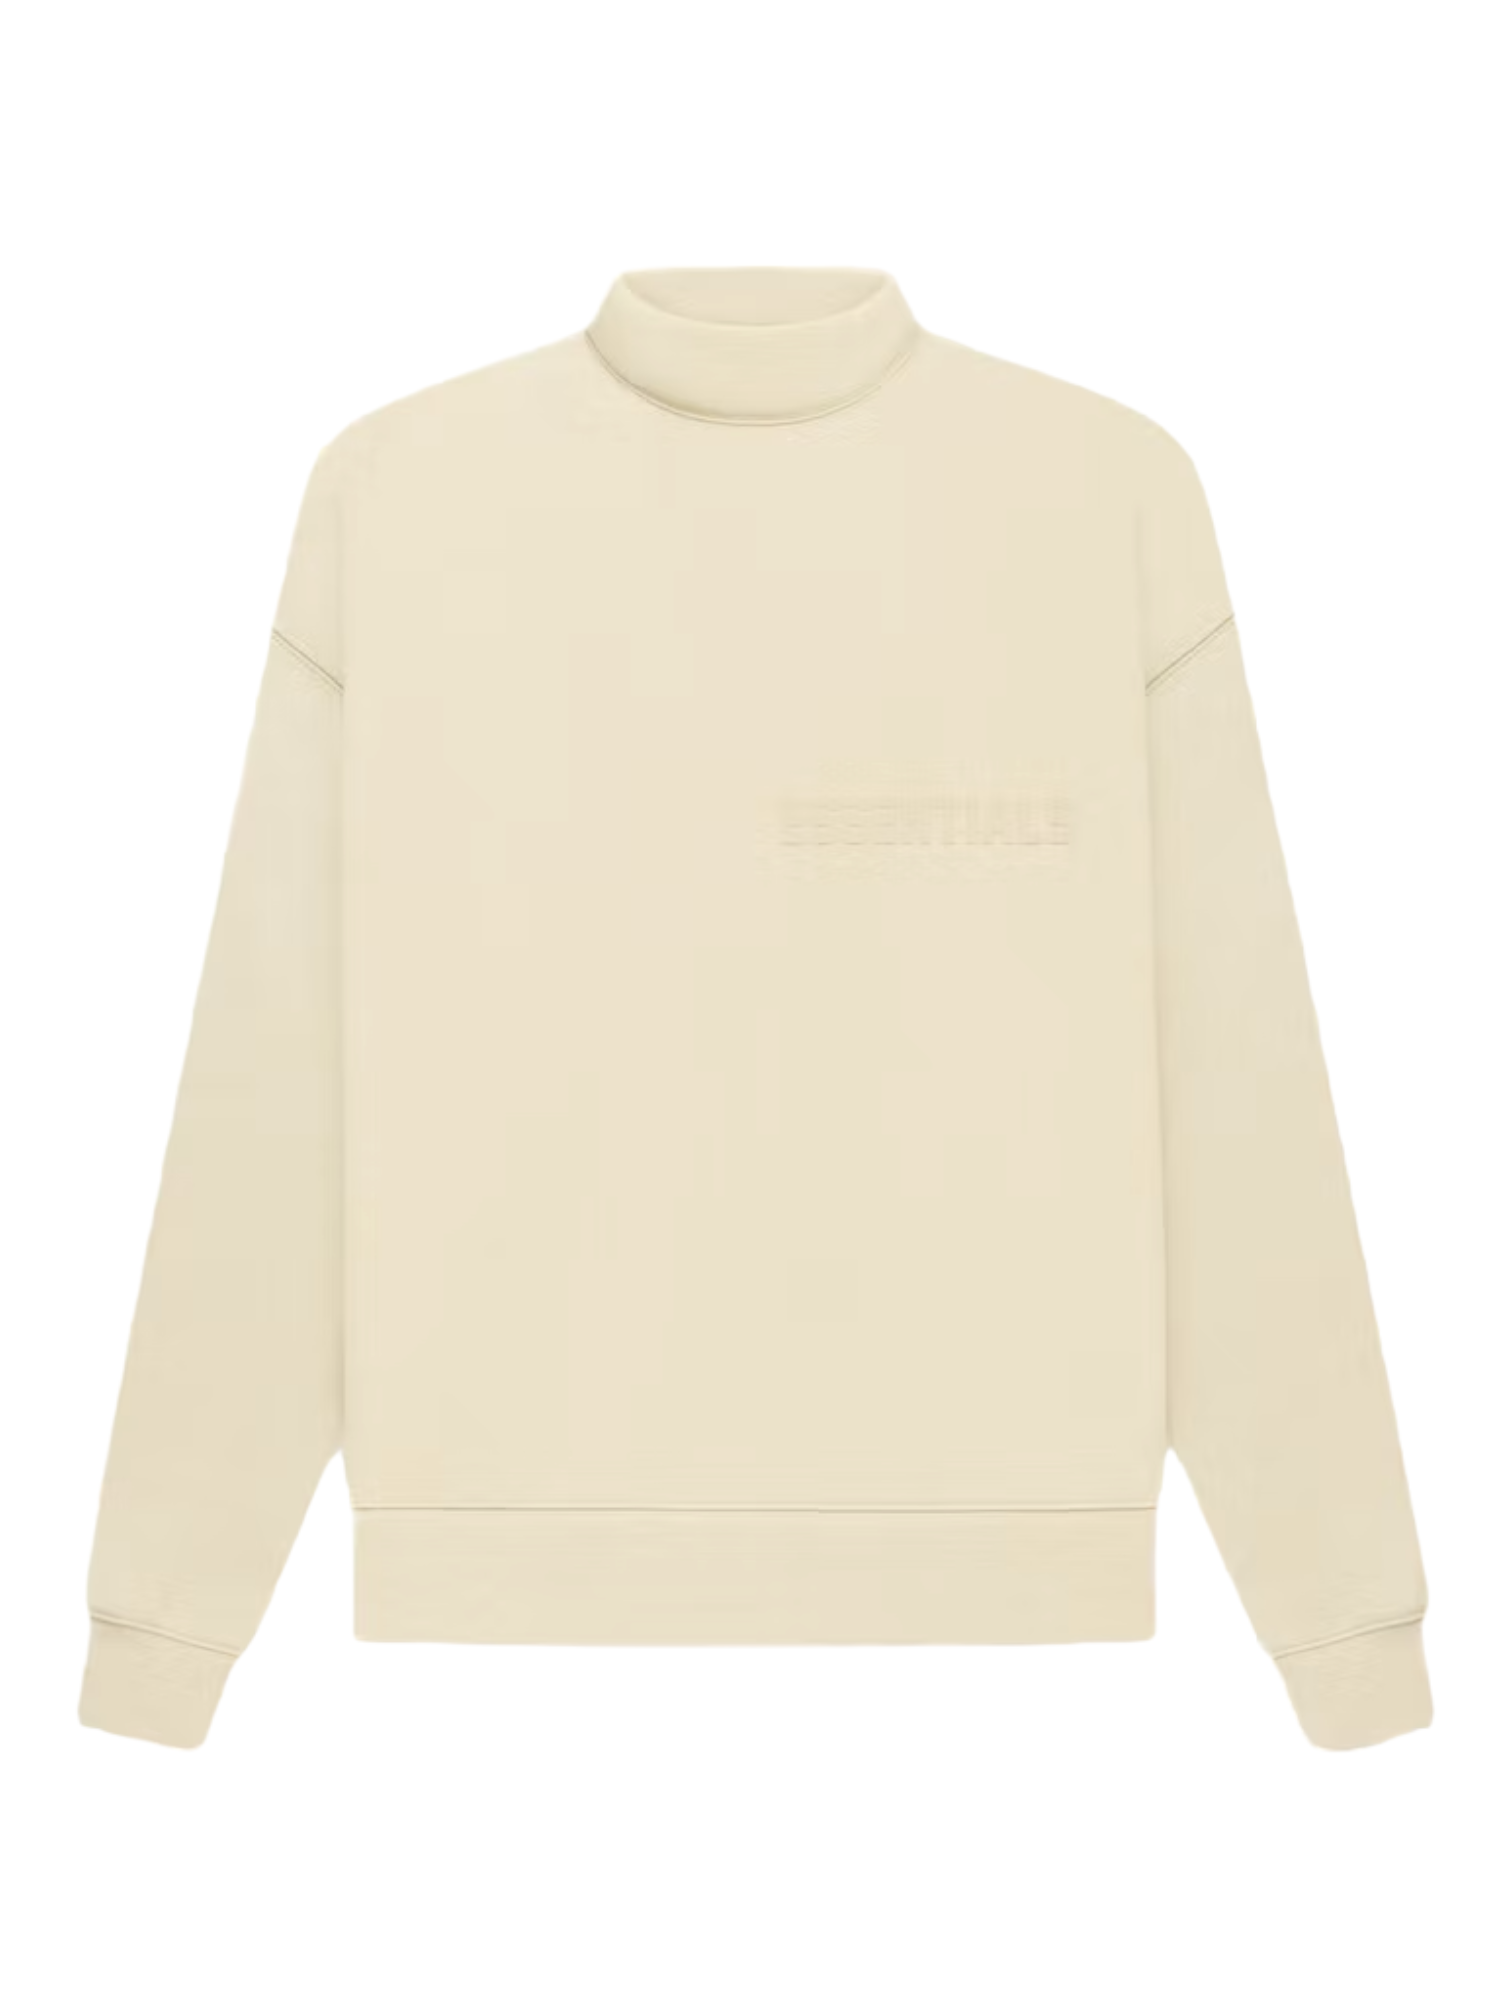 Essentials Fear of God Egg Shell Mockneck FW22— Genuine Design luxury consignment Calgary, Alberta, Canada New and pre-owned clothing, shoes, accessories.